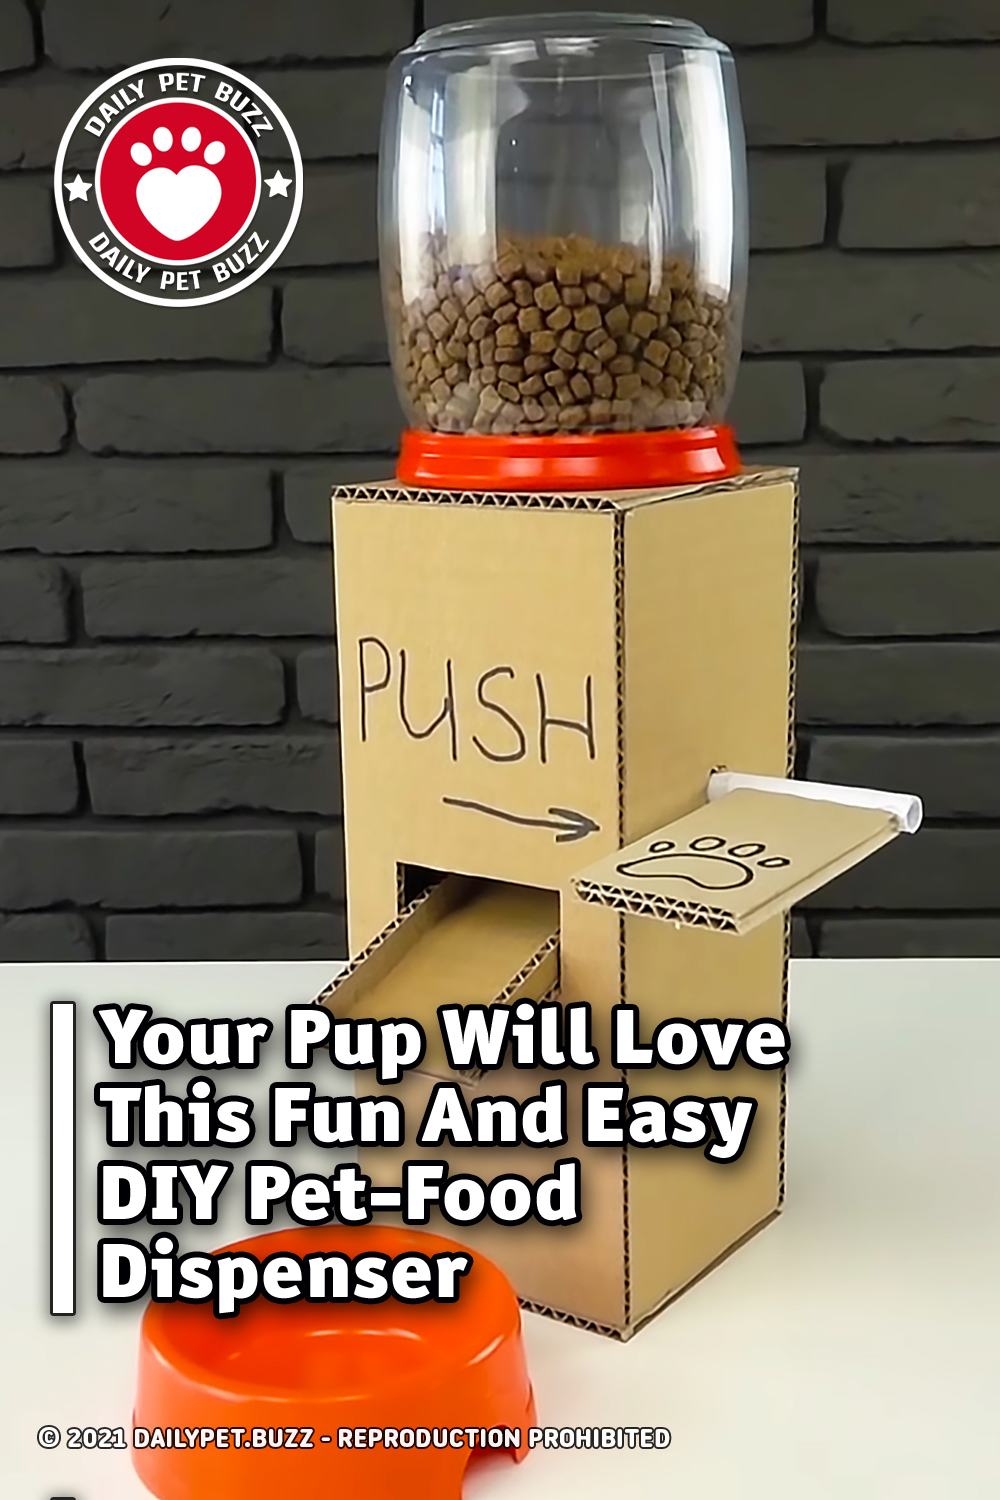 Your Pup Will Love This Fun And Easy DIY Pet-Food Dispenser